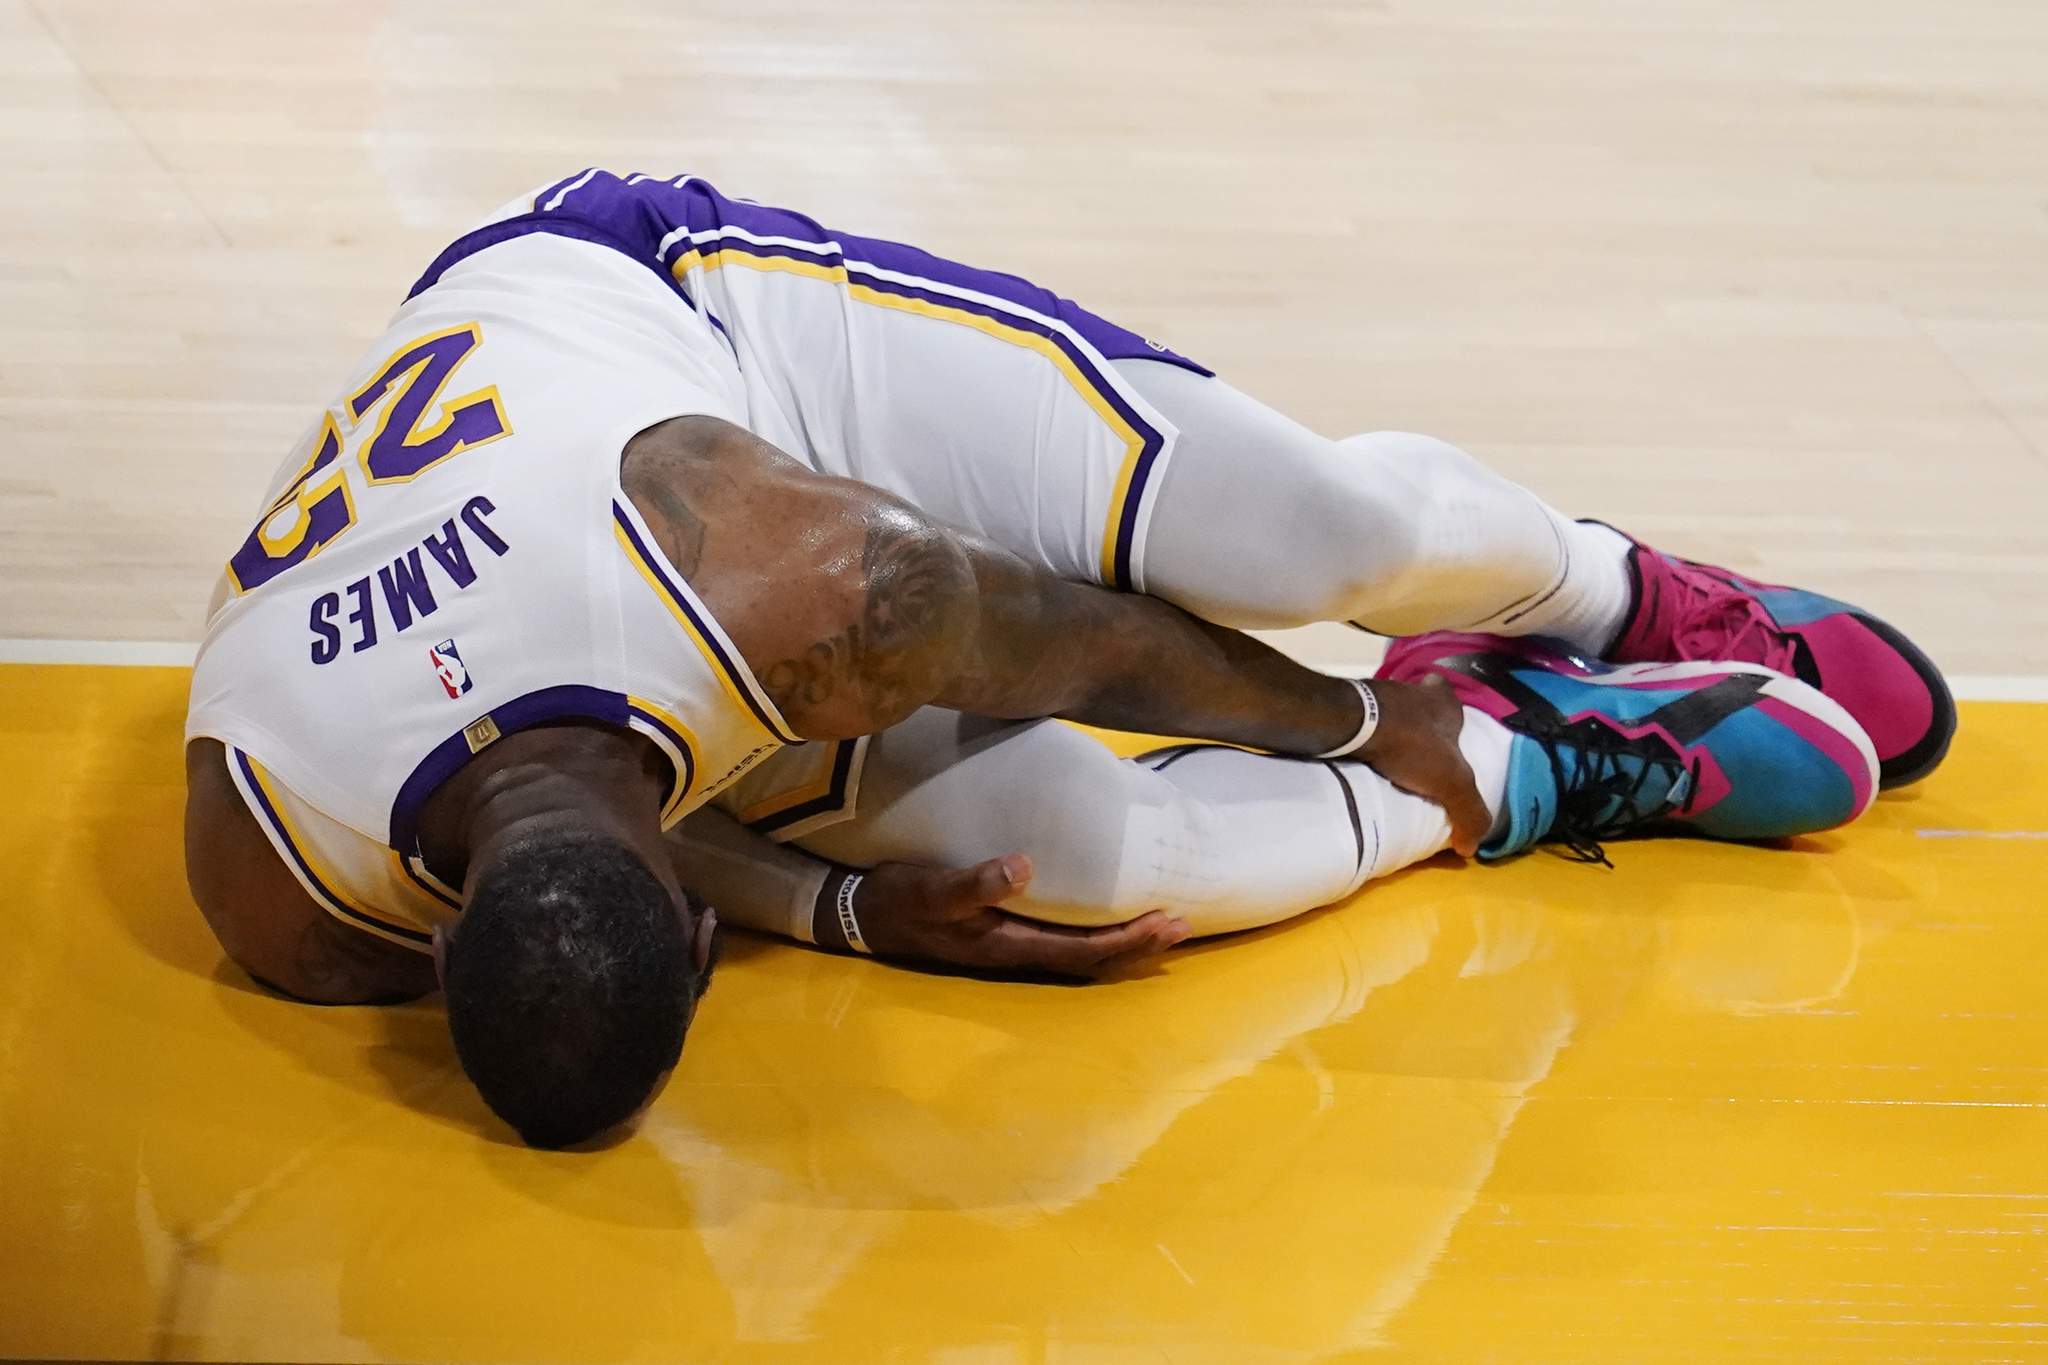 LeBron James sprains right ankle in loss, out indefinitely